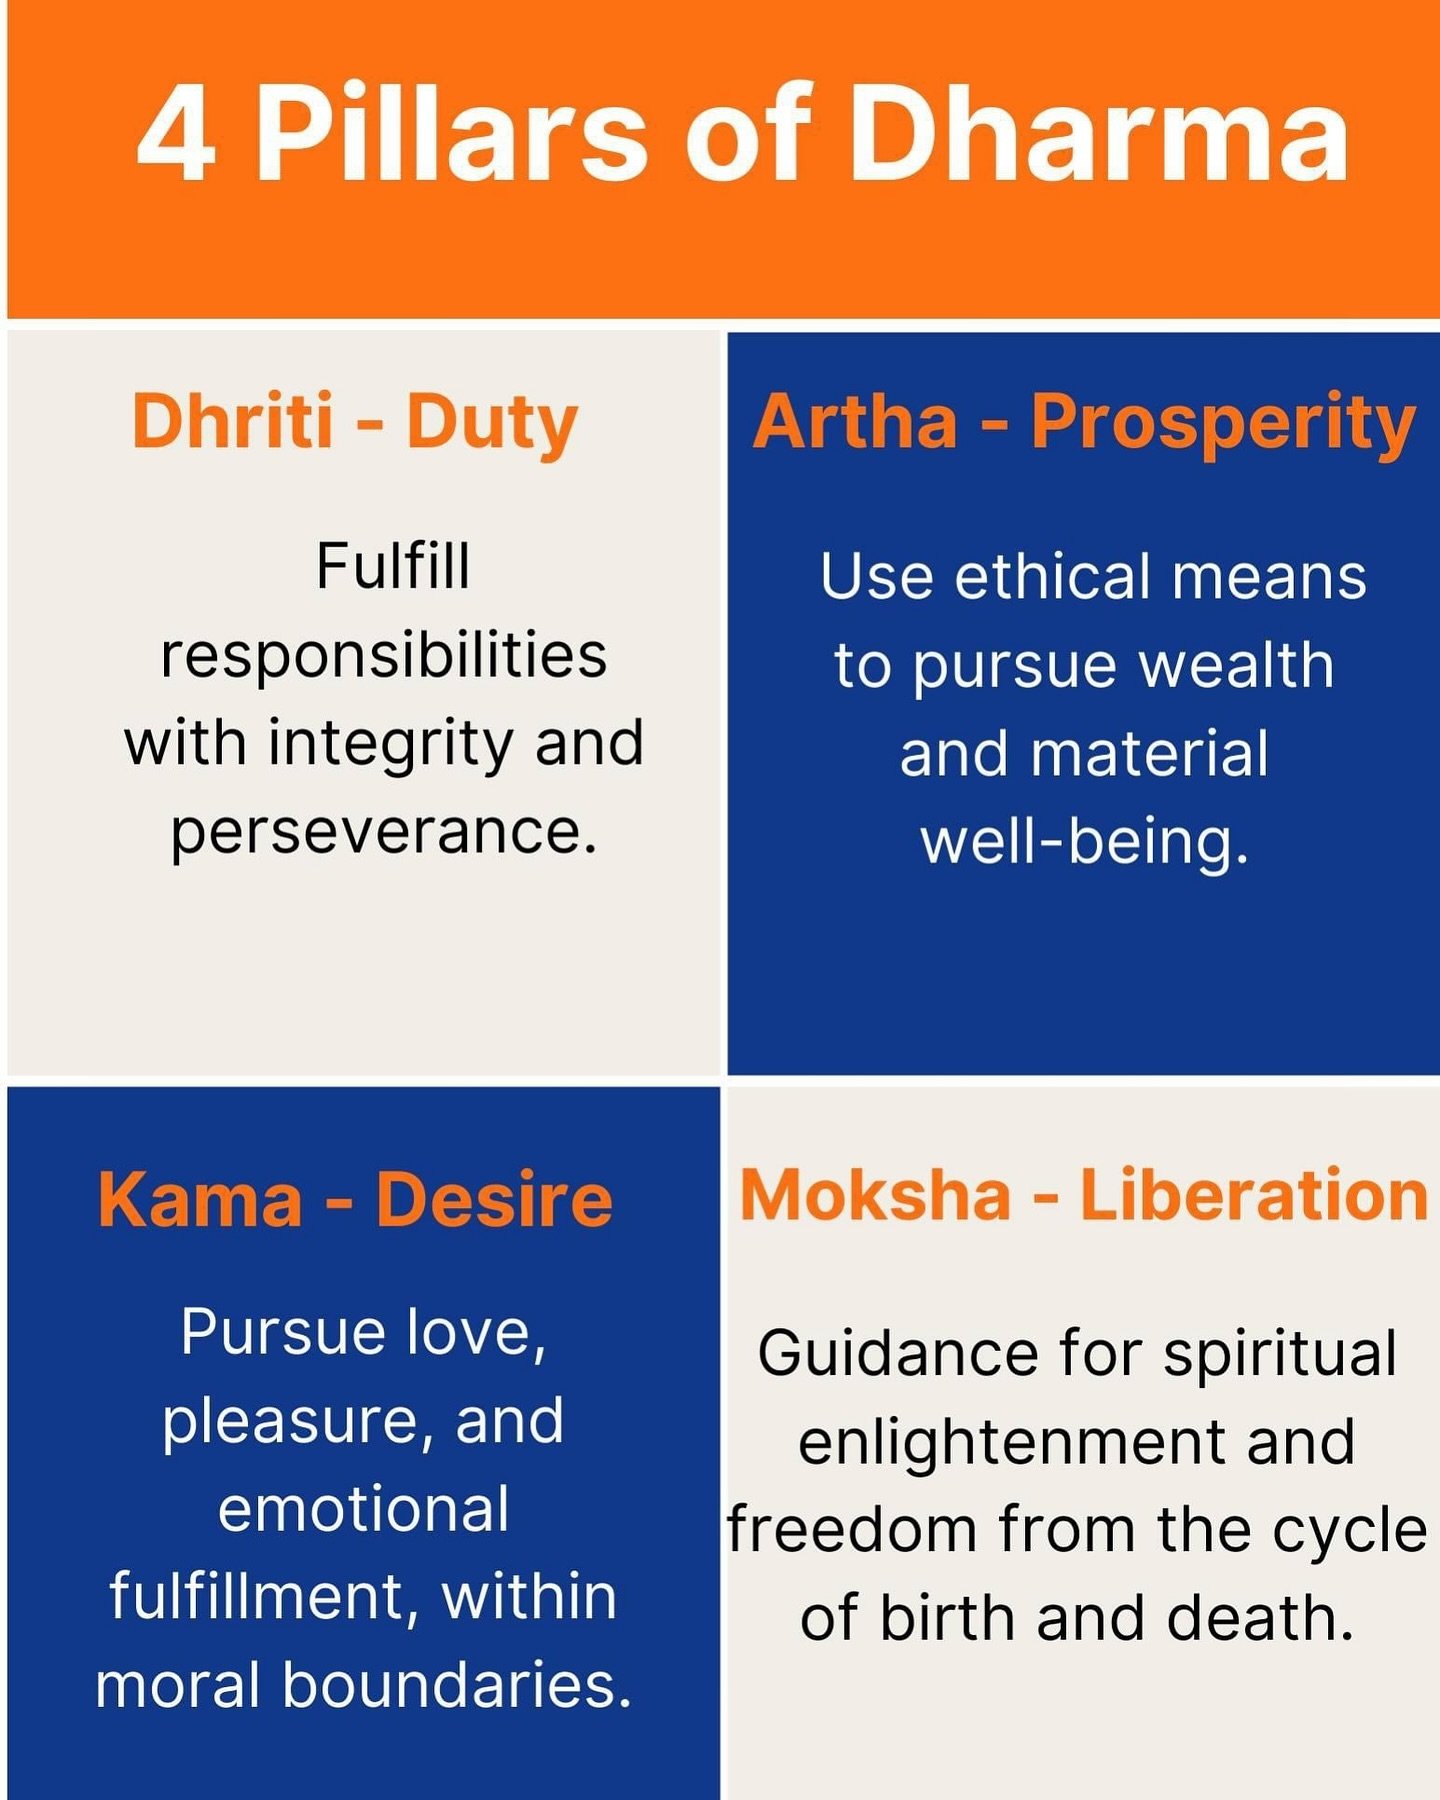 The four pillars of Dharma, central to Hindu ethics and philosophy, provide a moral compass for righteous living. 

These pillars collectively uphold a balanced and virtuous life in harmony with cosmic order.

#PillarsOfDharma #DharmicPrinciples